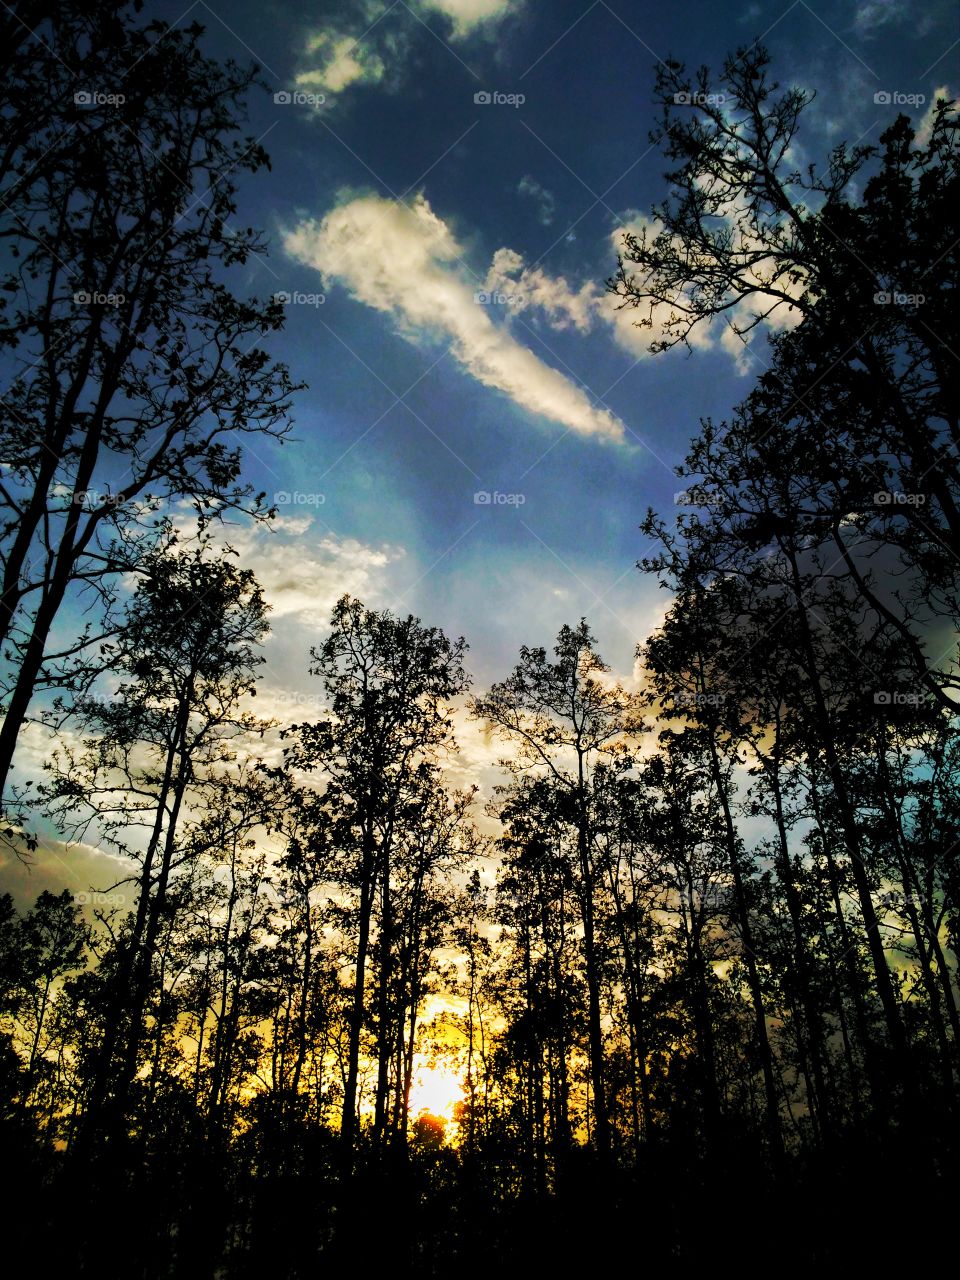 forest 
sunset